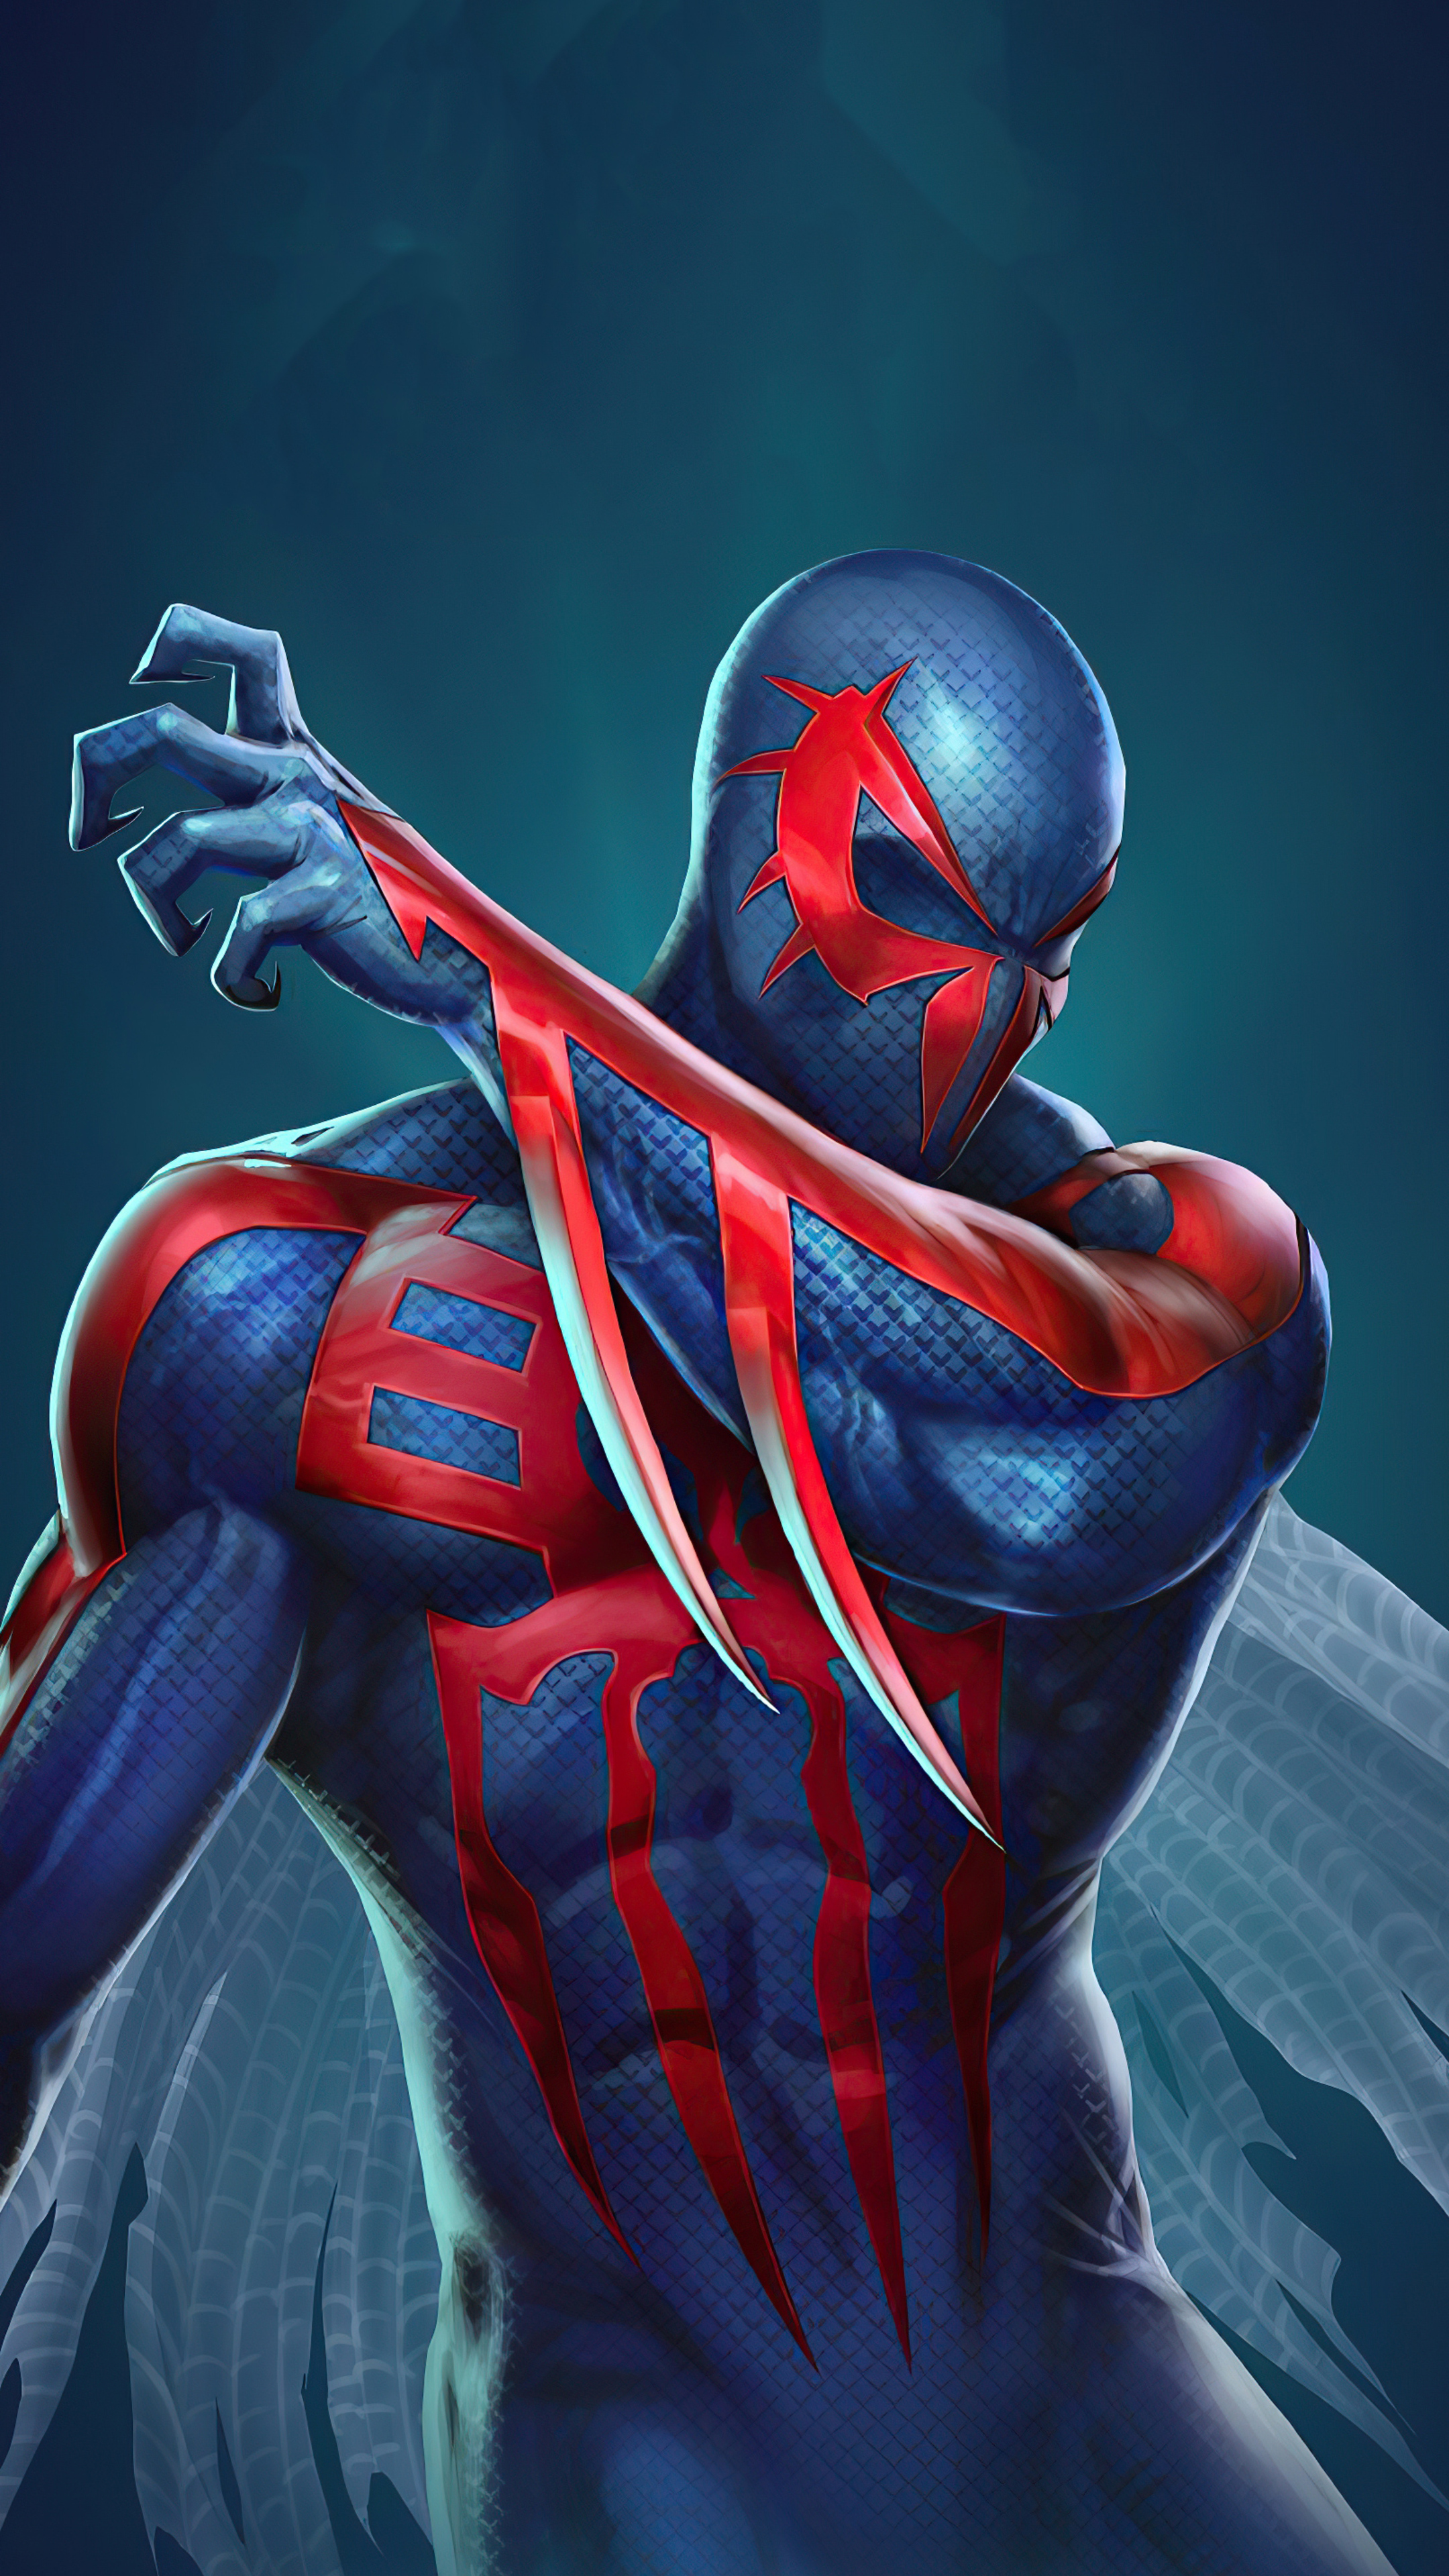 Spider man 2099 images - fodsustainable